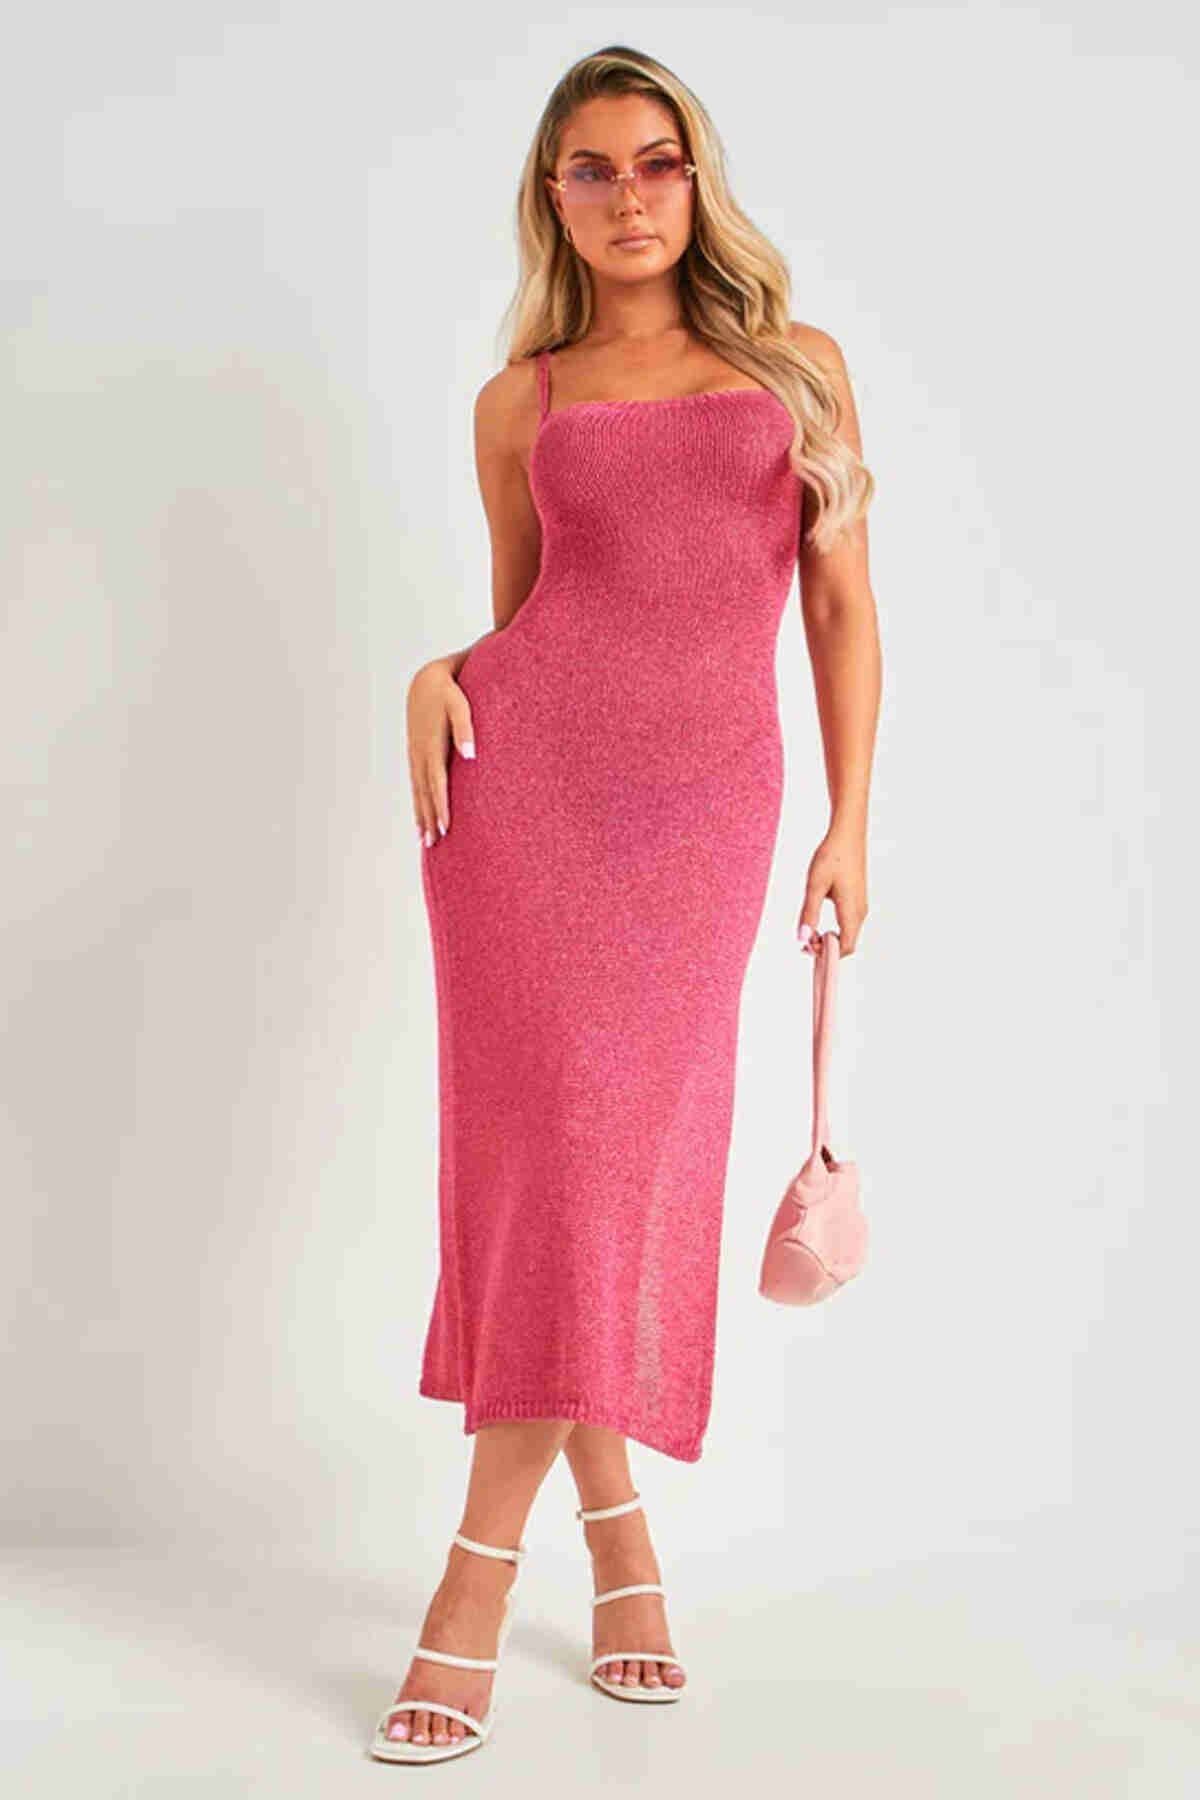 Knitted Knitted Dress With Back Neckline Tie Up Knit Knit Dress Pink